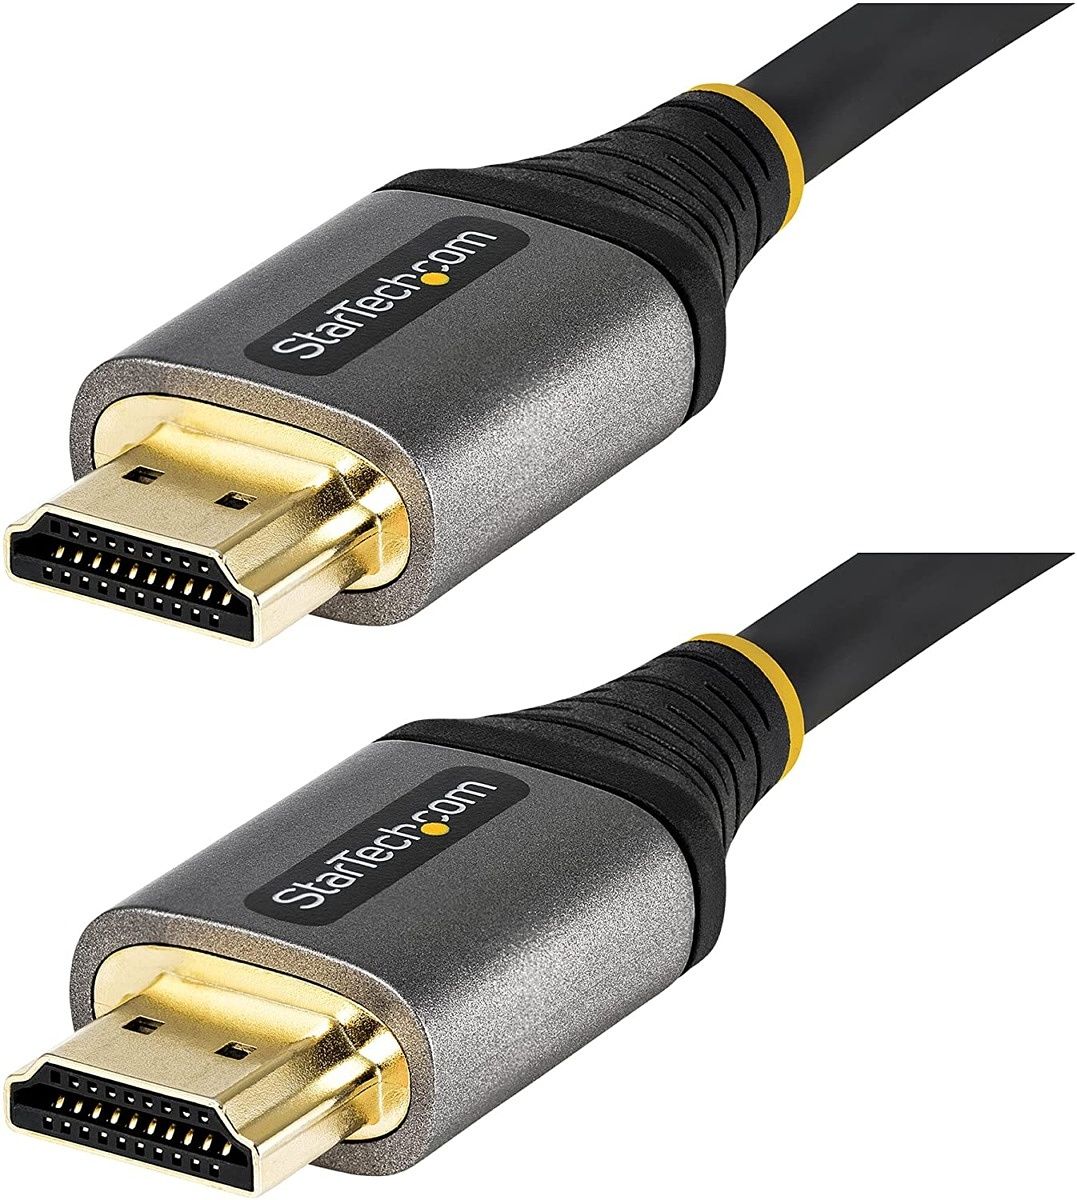 This StarTech.com HDMI 2.1 cable comes with a flexible TPE jacket for strain relief and longer life. It’s available in one-meter and two-meter sizes.